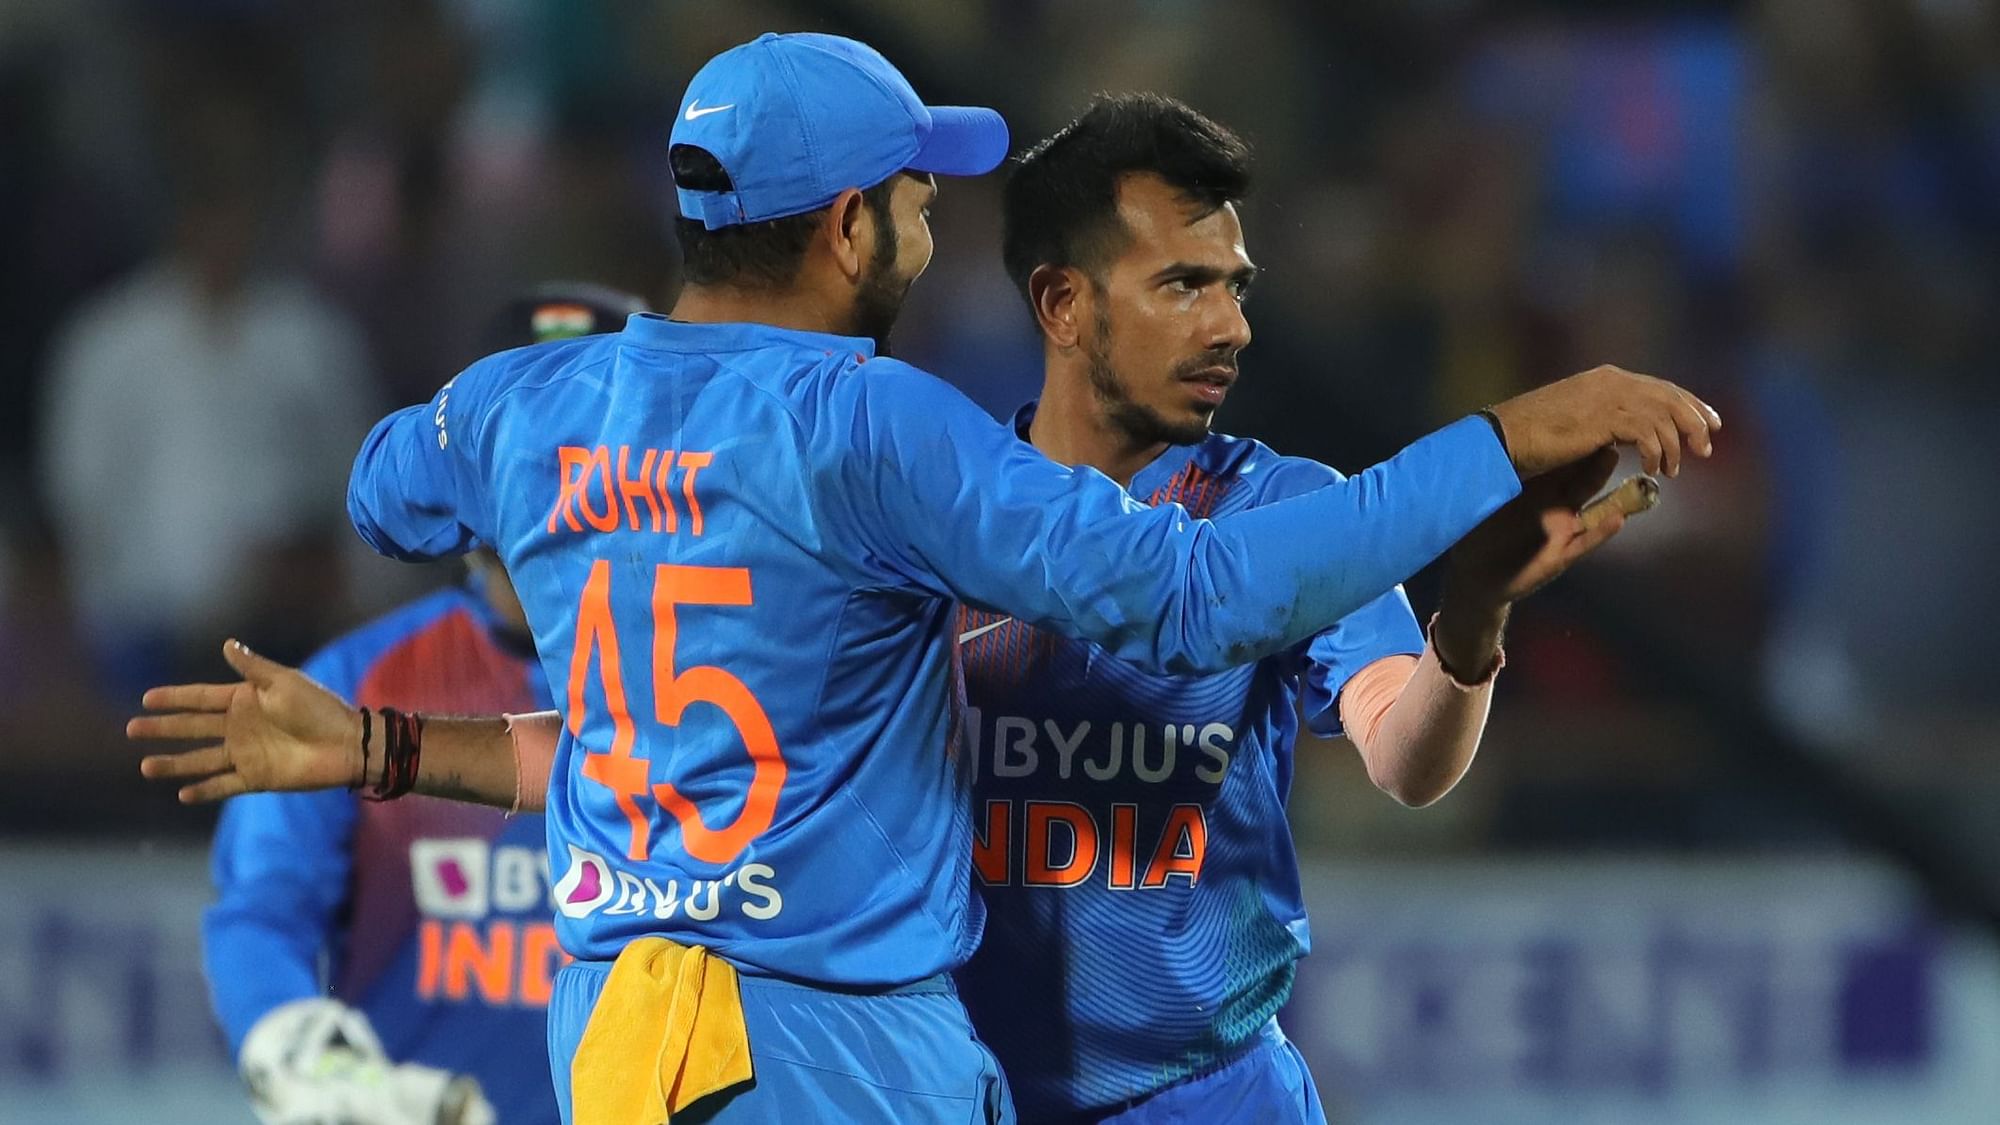 Yuzvendra Chahal has made a successful comeback with a stellar showing against Bangladesh in the T20I series.